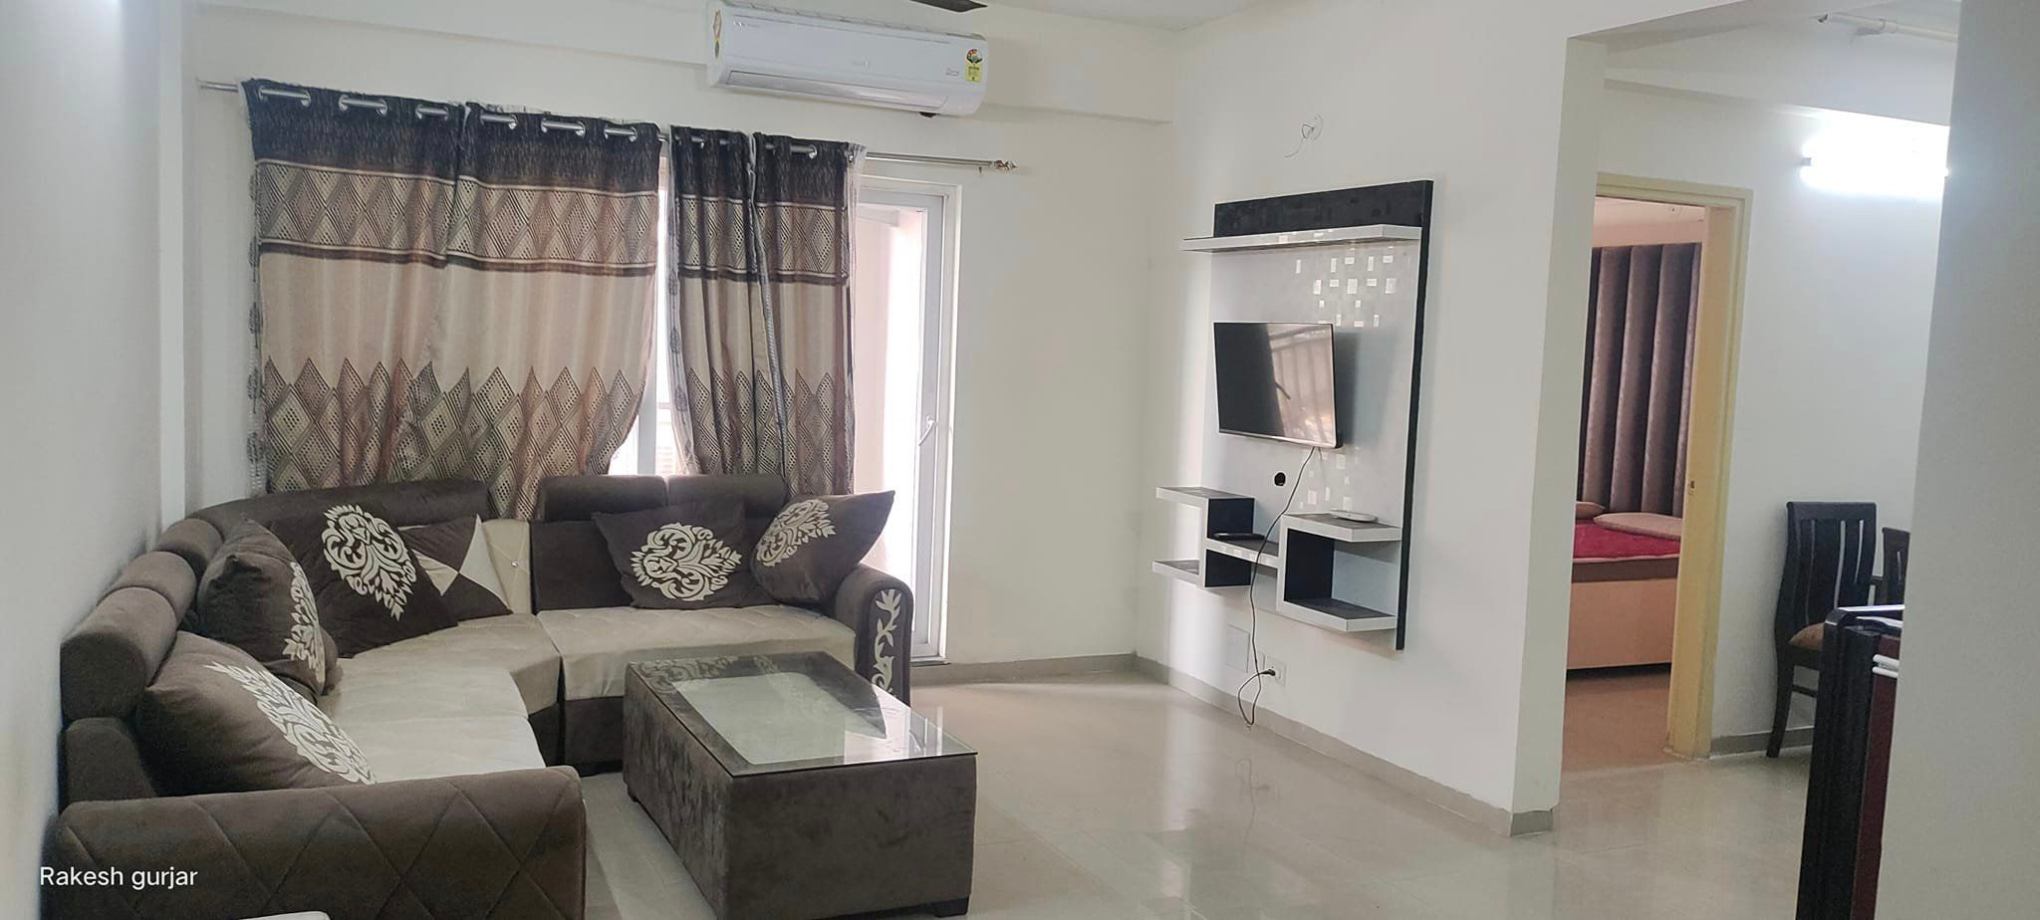 3 Bed/ 3 Bath Apartment/ Flat, Furnished for rent @Noida extension 1 murti chowk